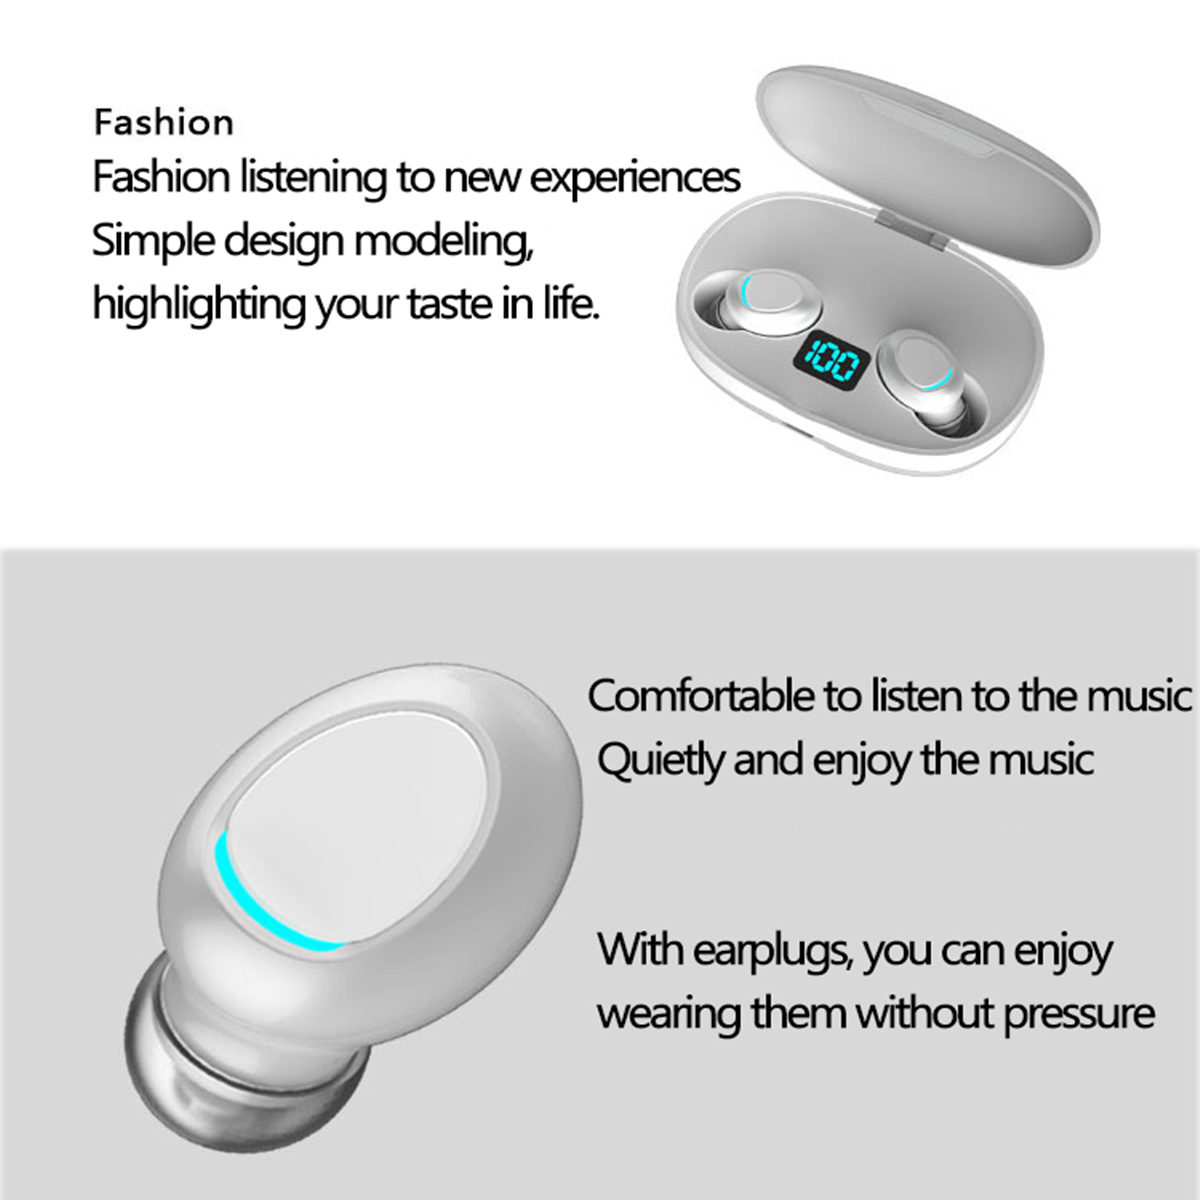 Dual-Digital-Display-True-Wireless-Headset-Button-Touch-bluetooth-50-Earphone-with-Portable-Charging-1565020-9